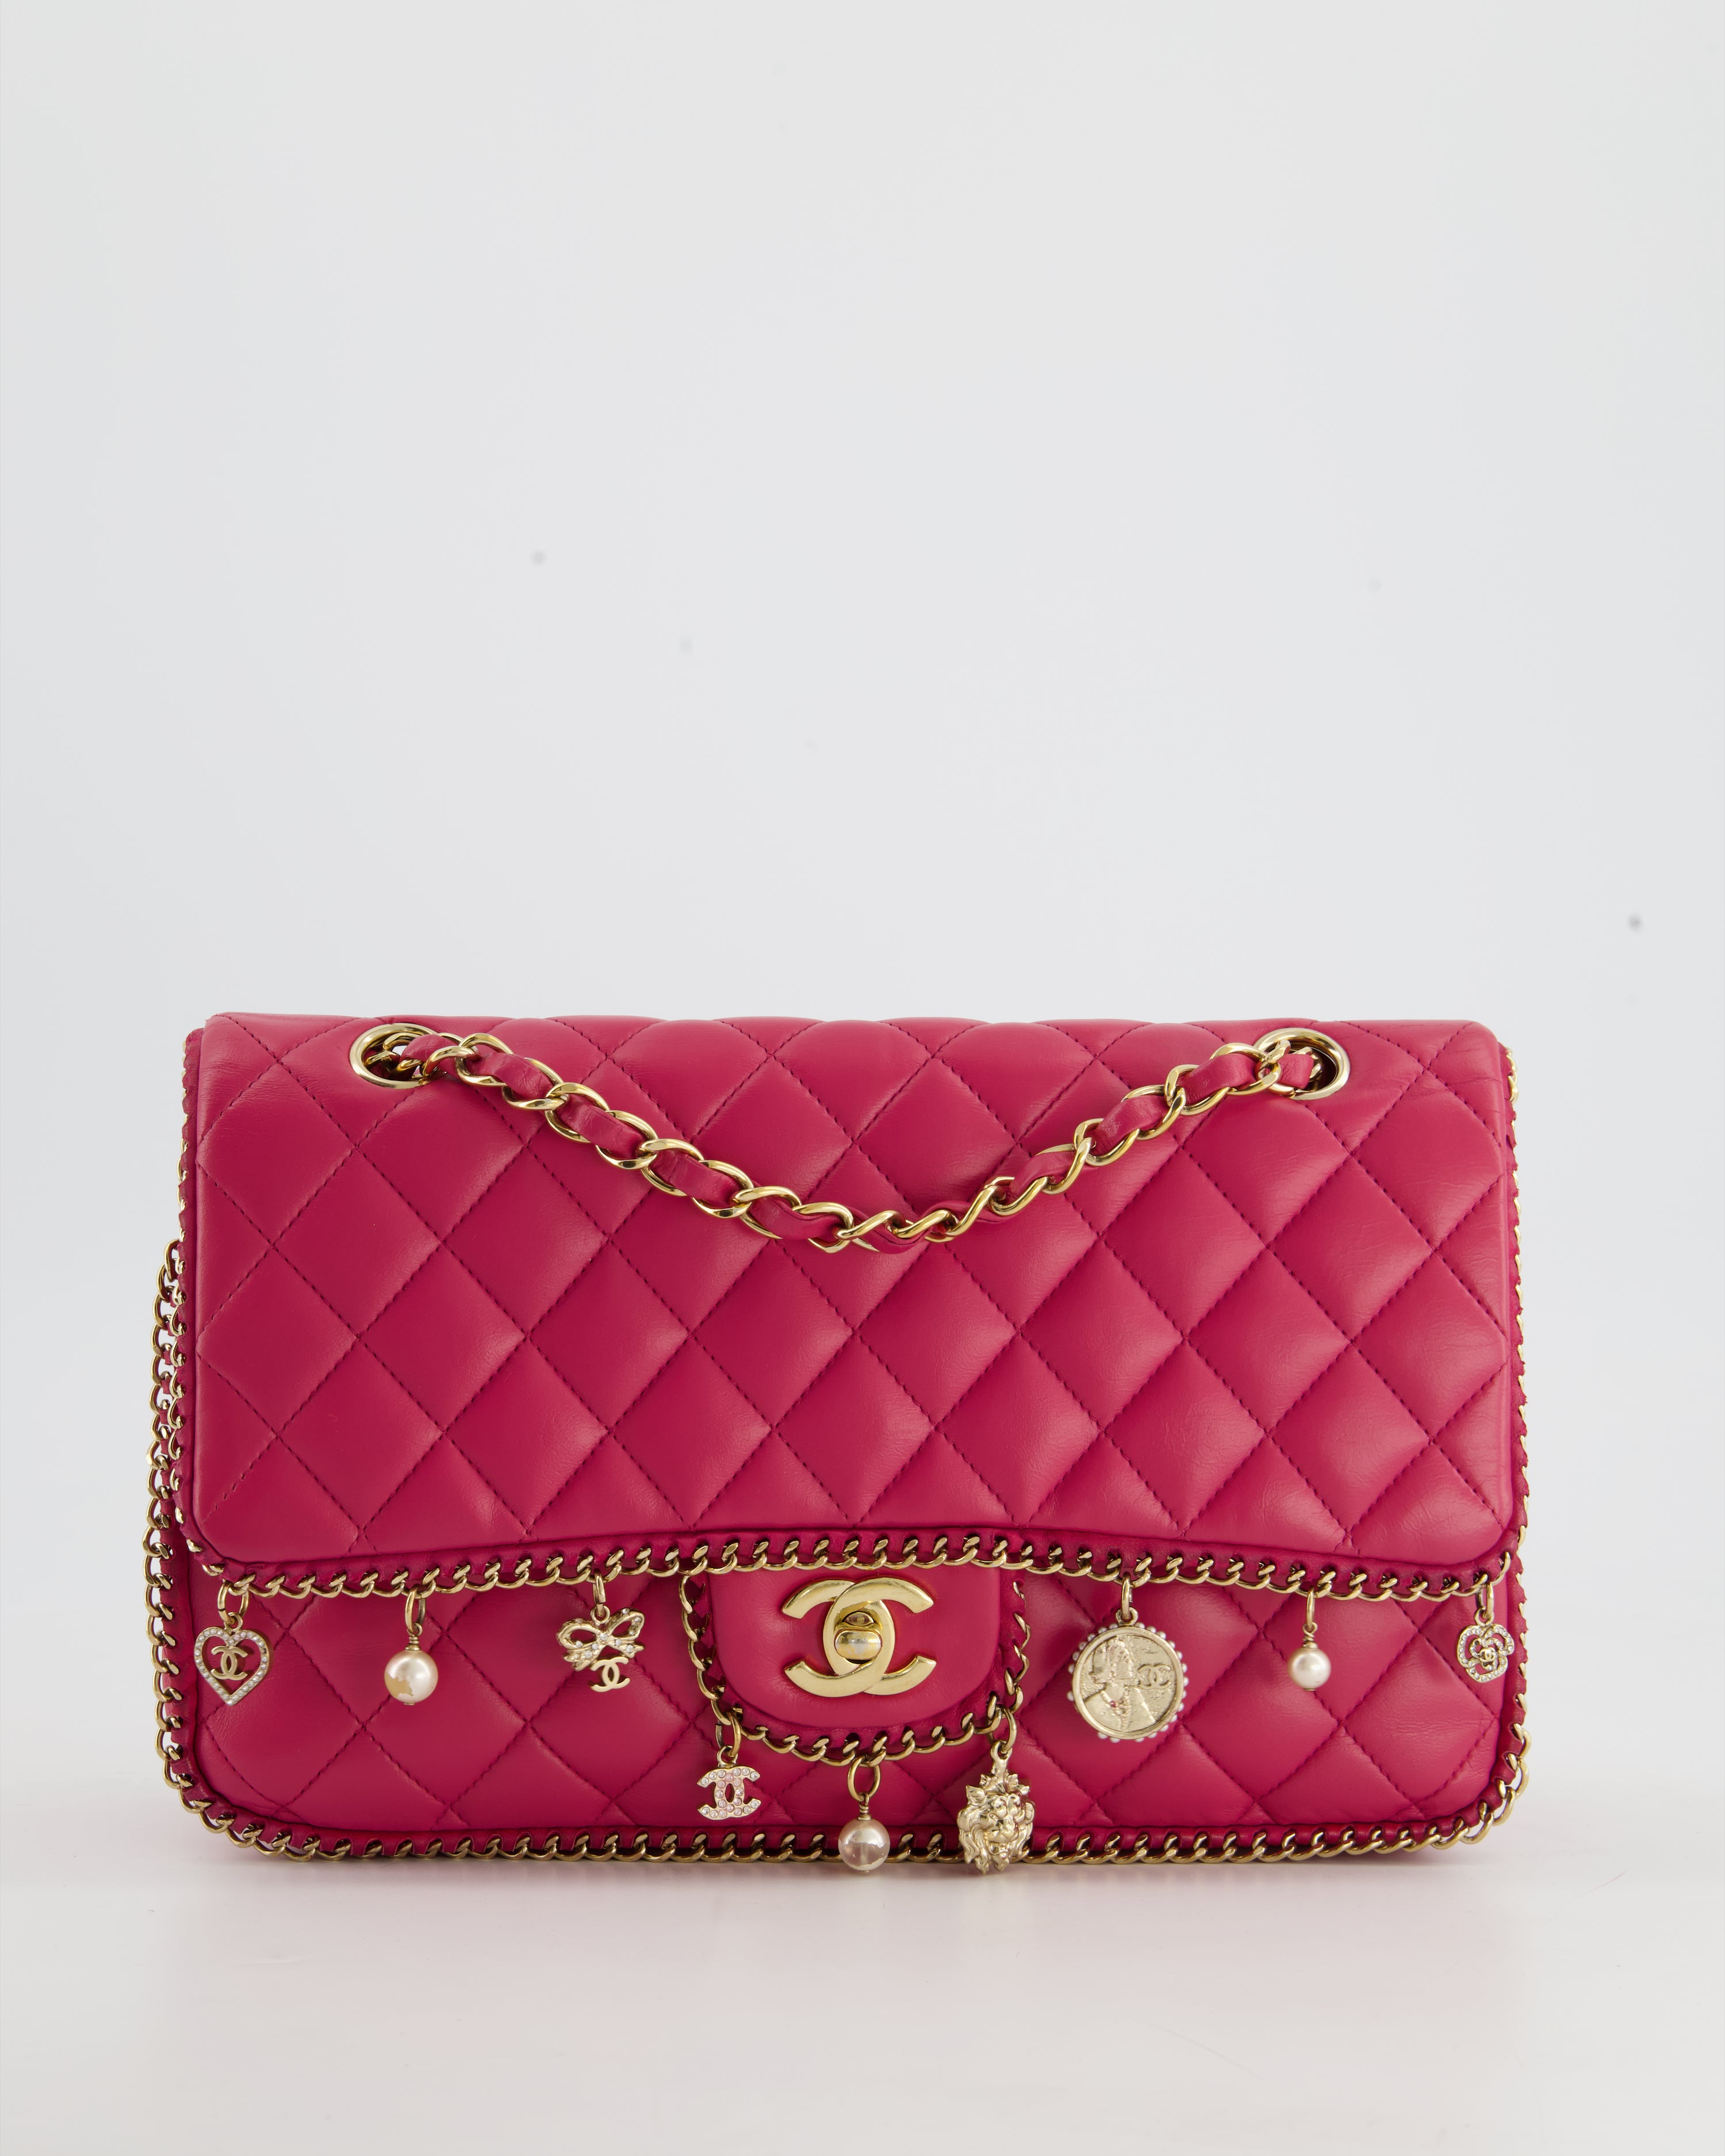 Chanel Raspberry Pink Chain Edge Embellished Medium Double Flap Bag in –  Sellier